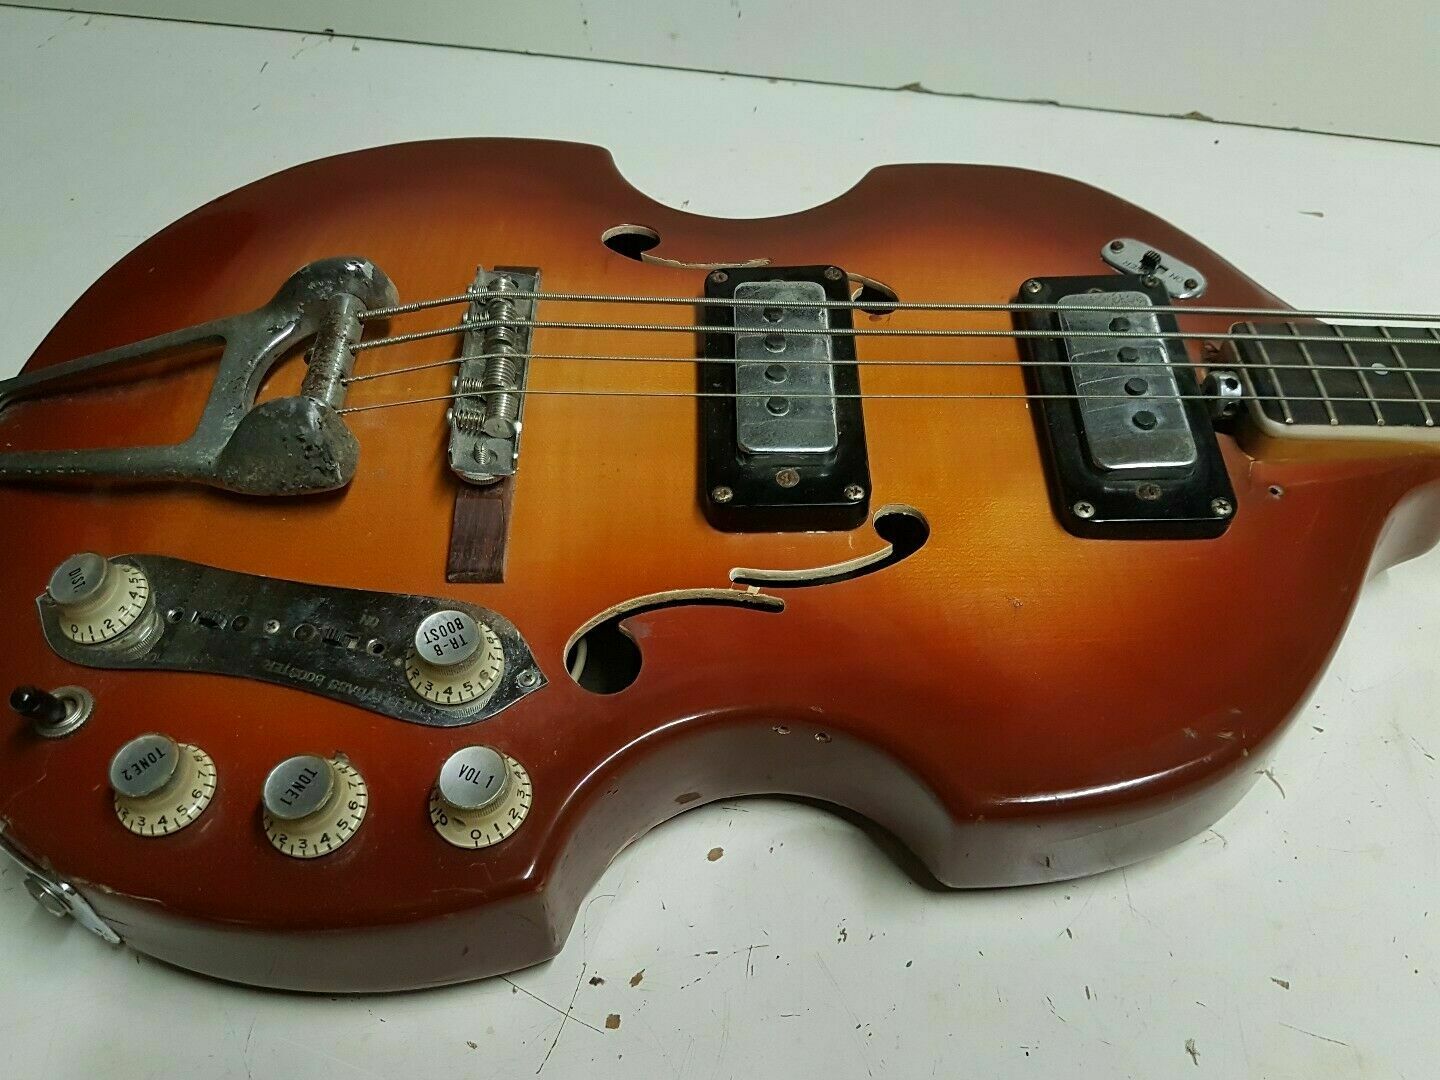 1969 Vox Violin Bass - Built In Effects - Distortion - Booster -tuner